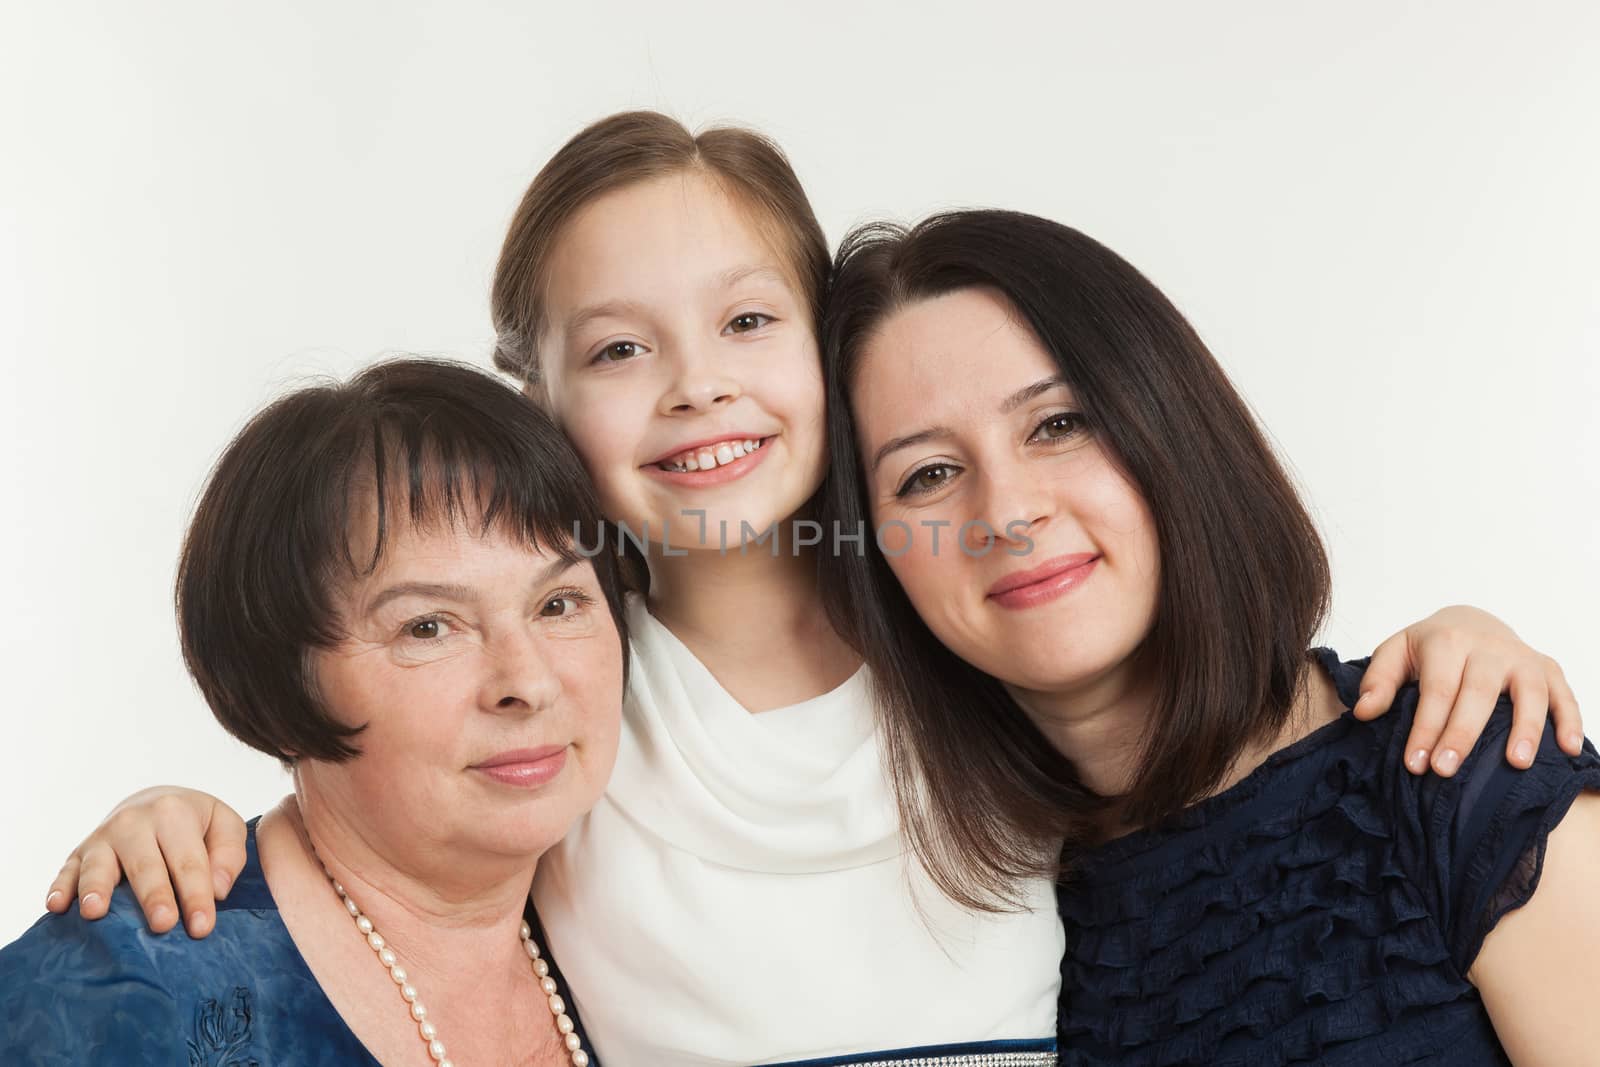 The granddaughter embraces the grandmother and mother on a white background